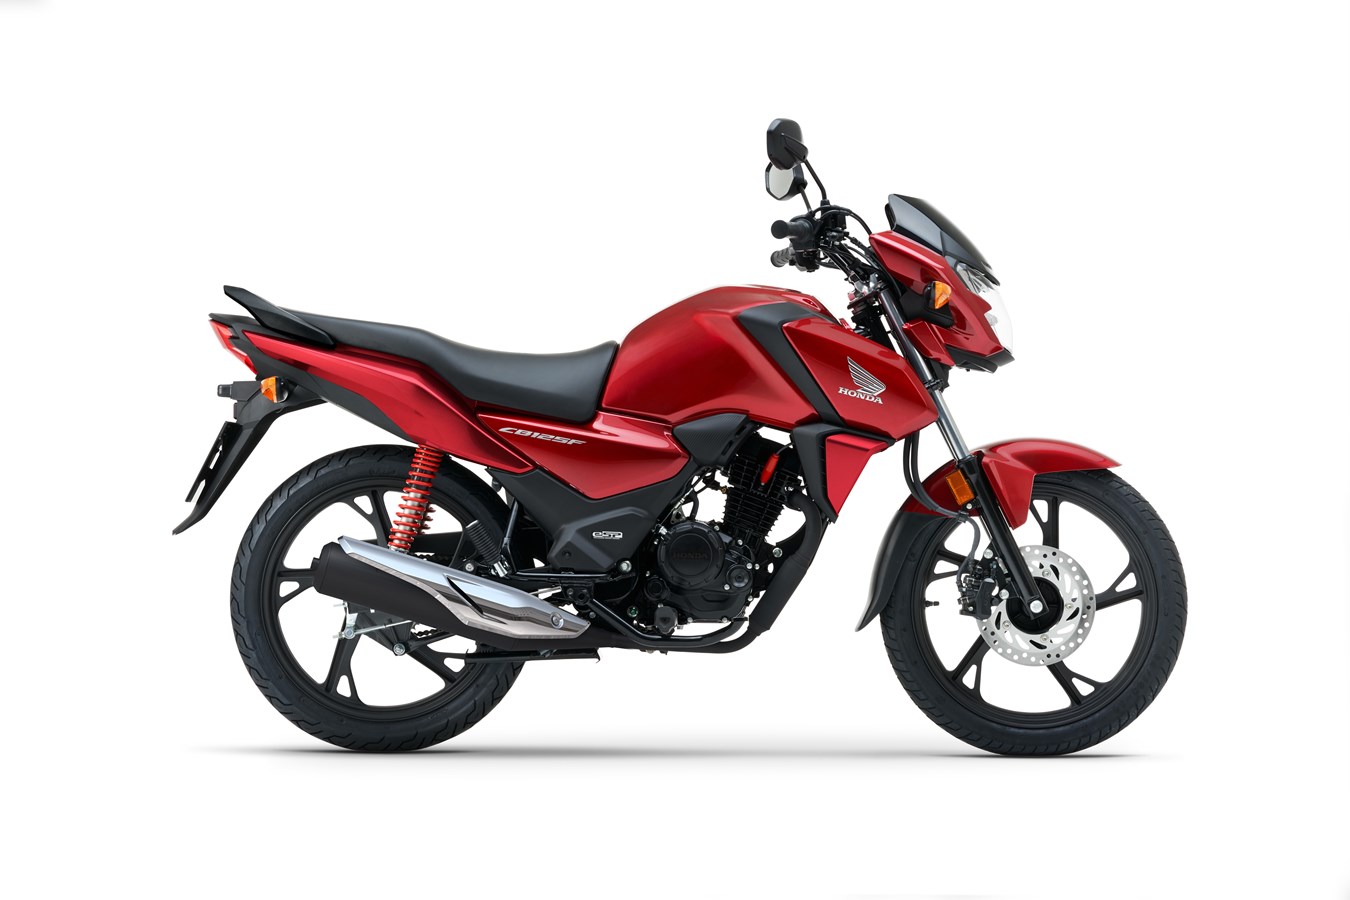 A vibrant new colour for the Dax, and cosmetic updates and new colours for the CB125F round out Honda’s 24 year model line-up